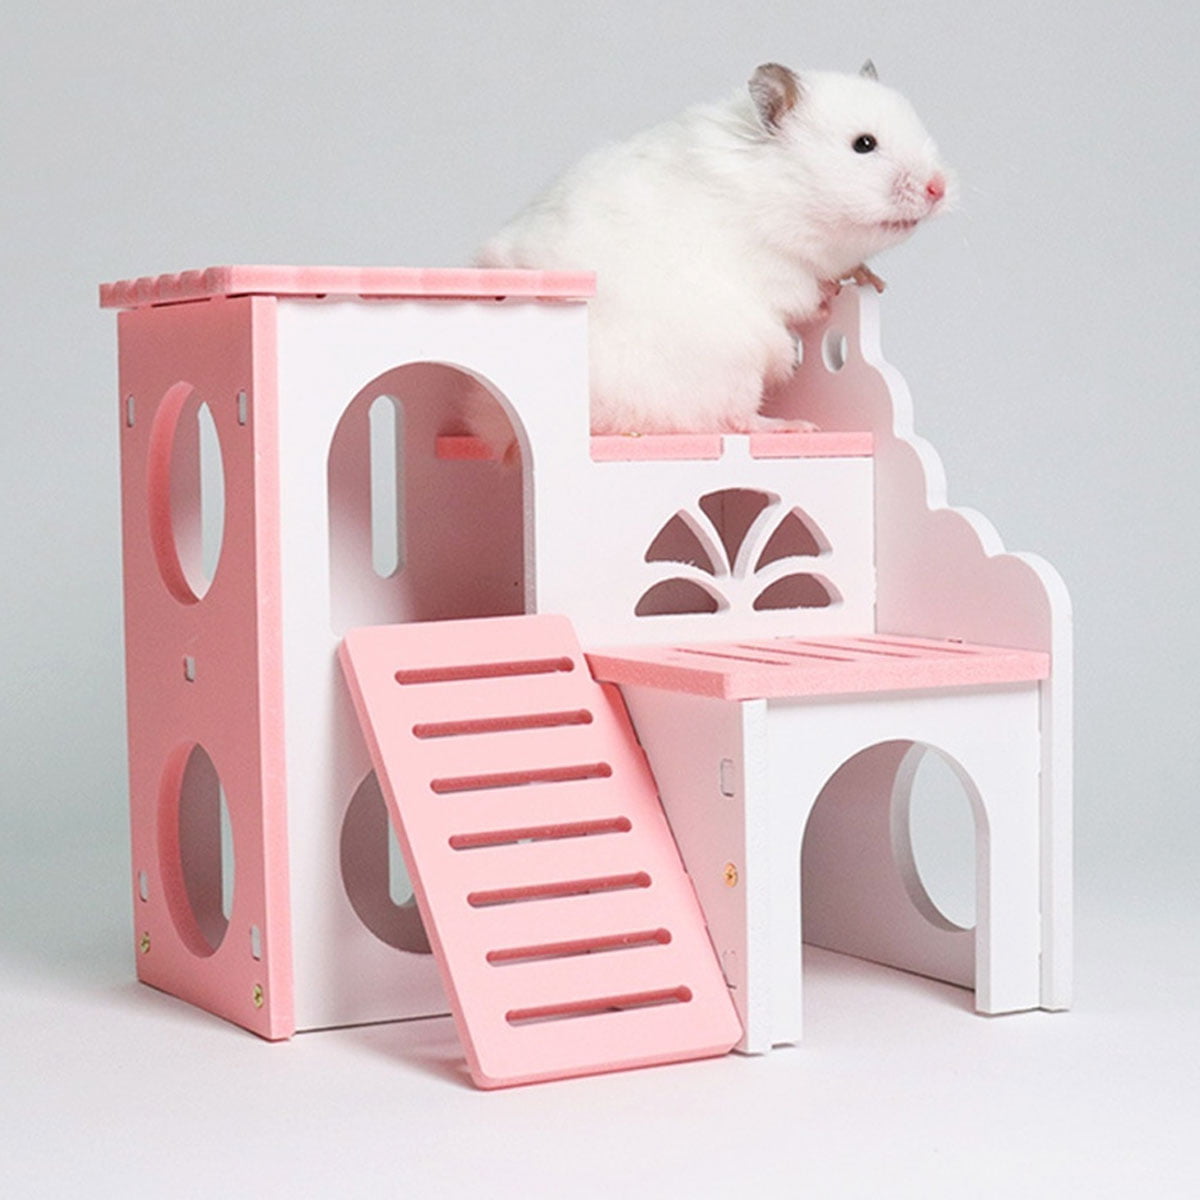 Hamster Toy Rainbow House Wood Chinchilla Squirrel Gerbil Ecological Cage Nest 